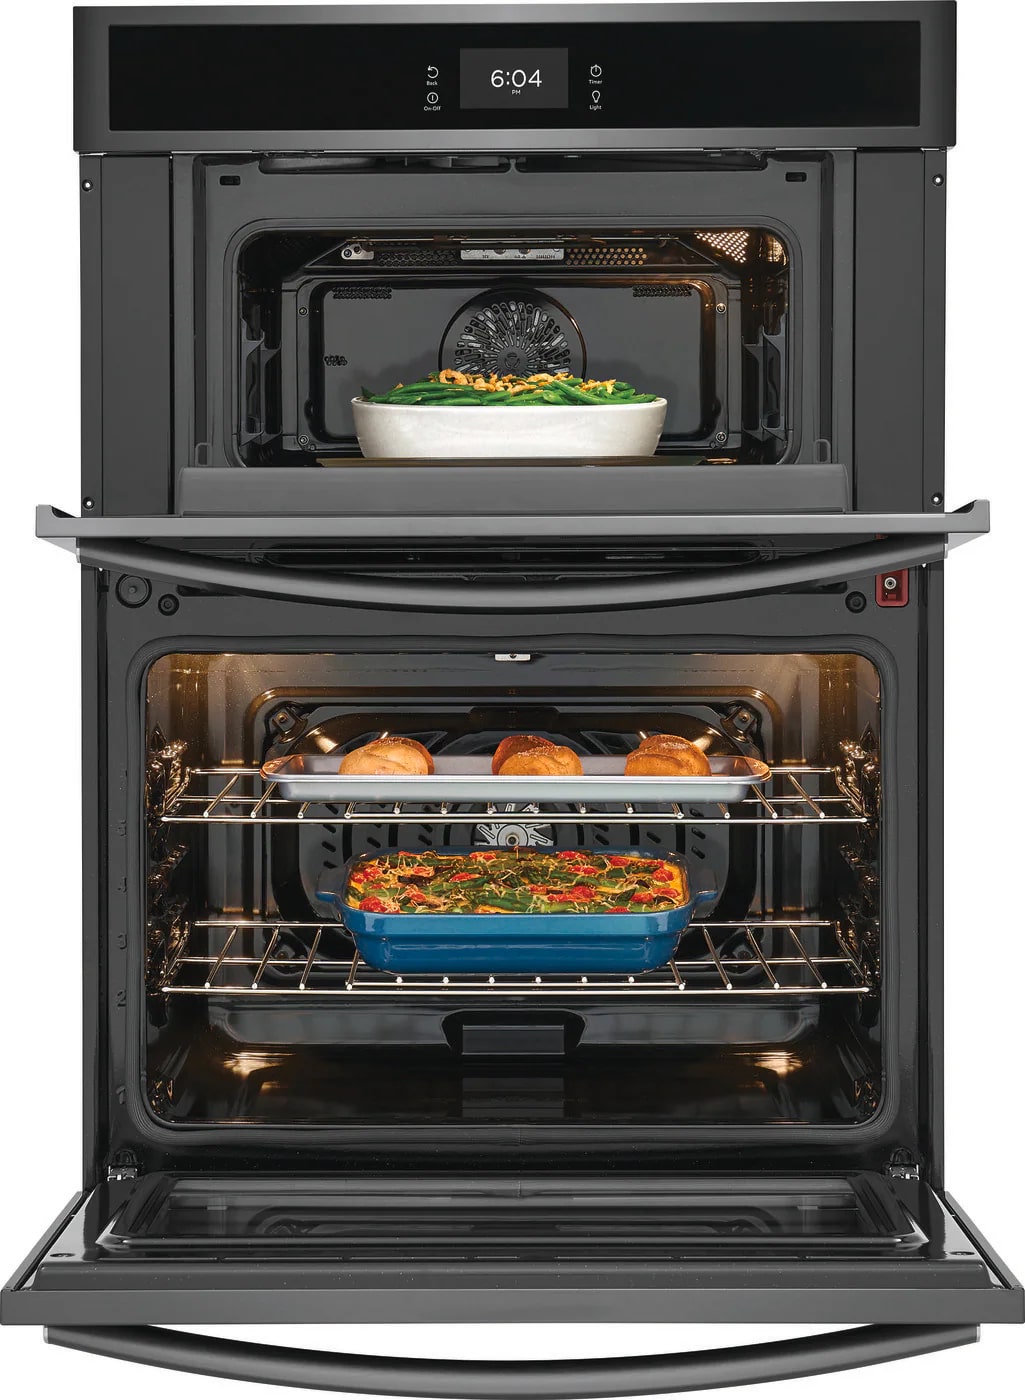 Frigidaire Gallery - 7 cu. ft Combination Wall Oven in Black Stainless - GCWM3067AD